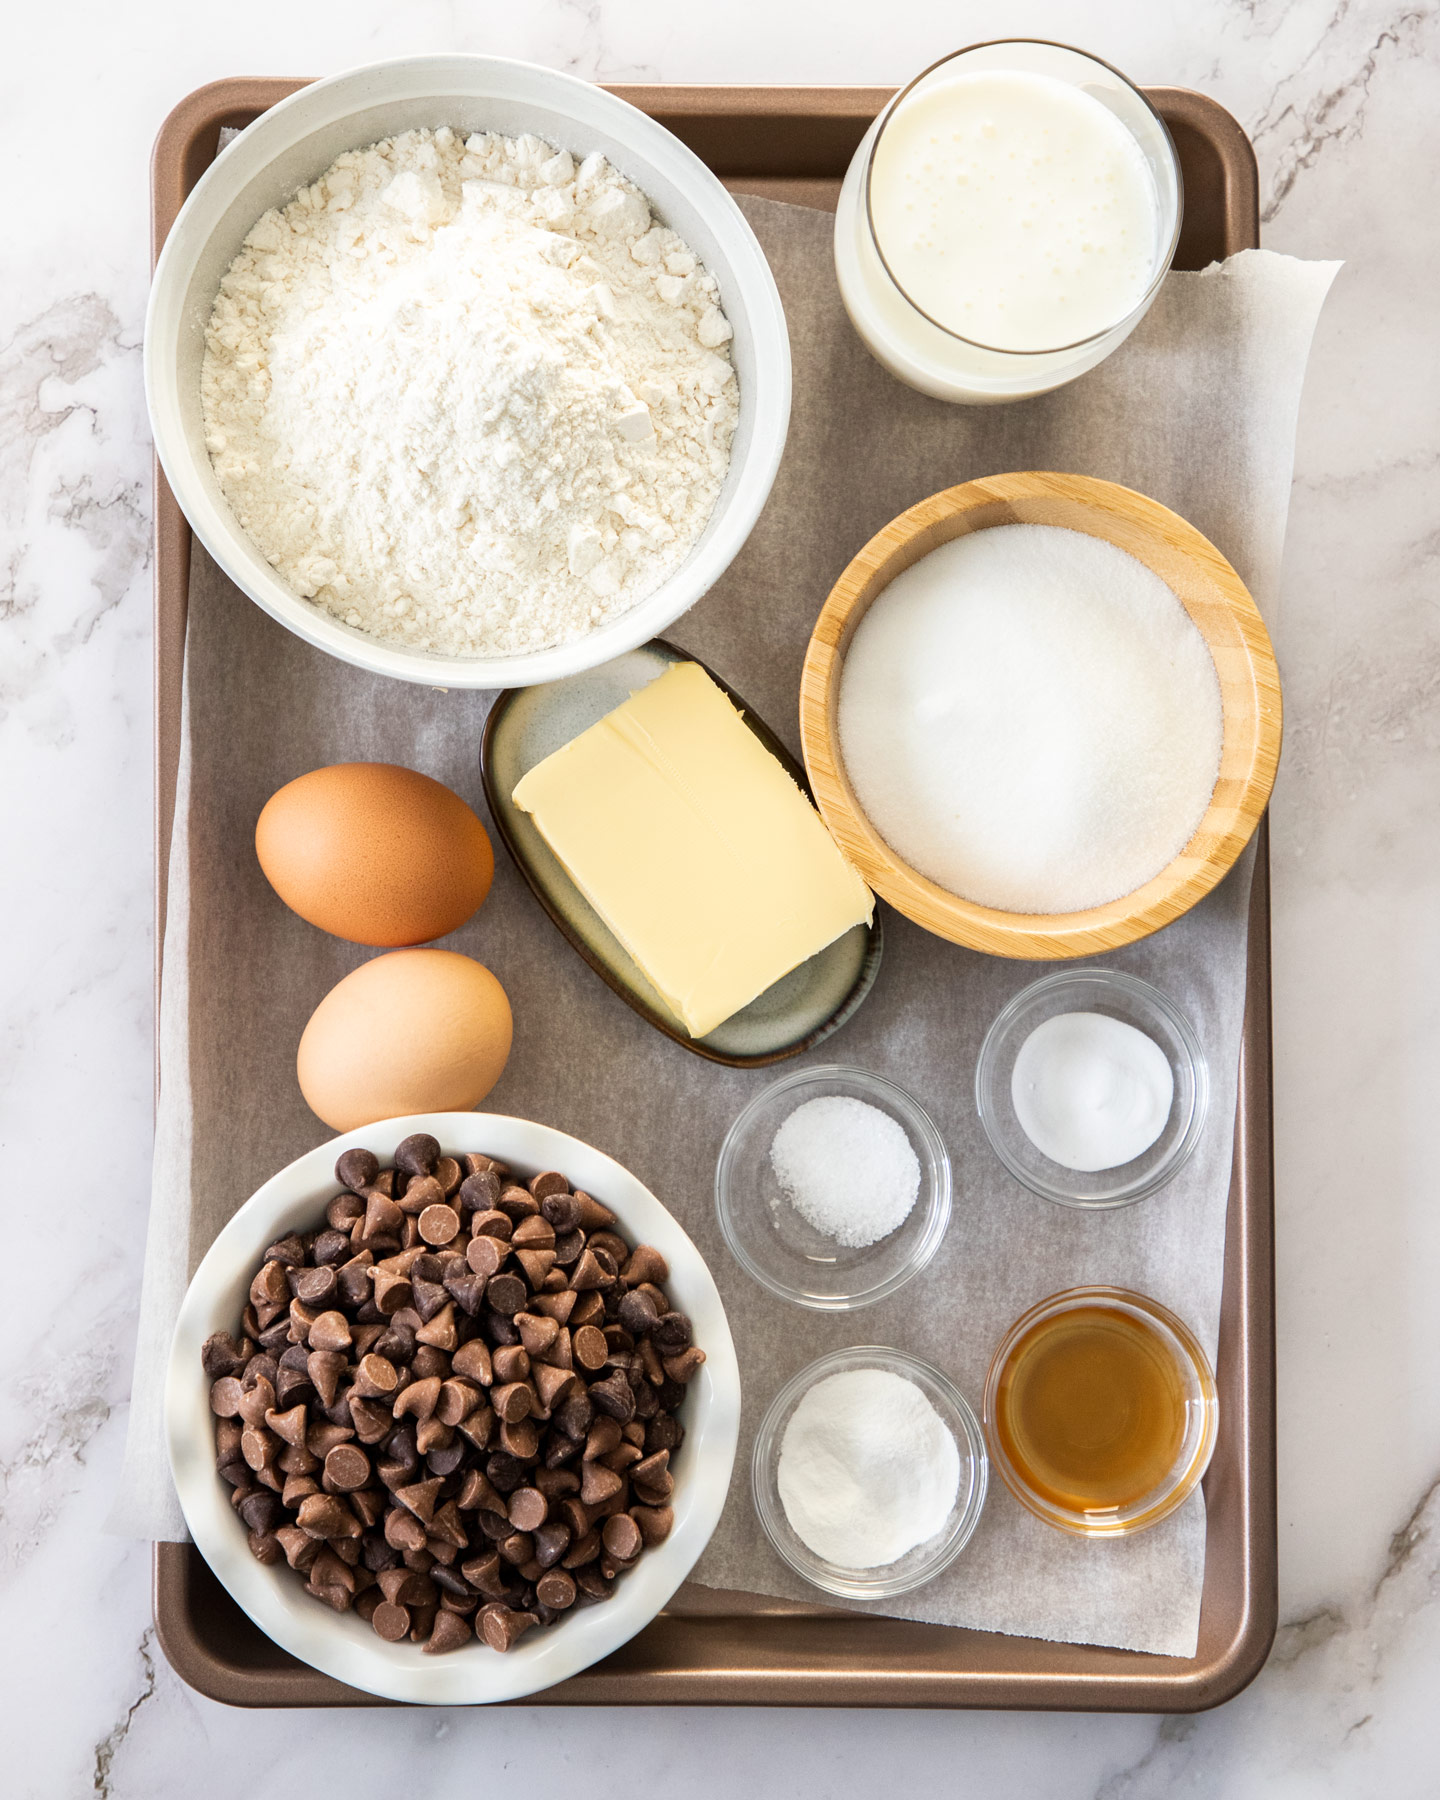 Ingredients for chocolate chip muffins in a baking tray.